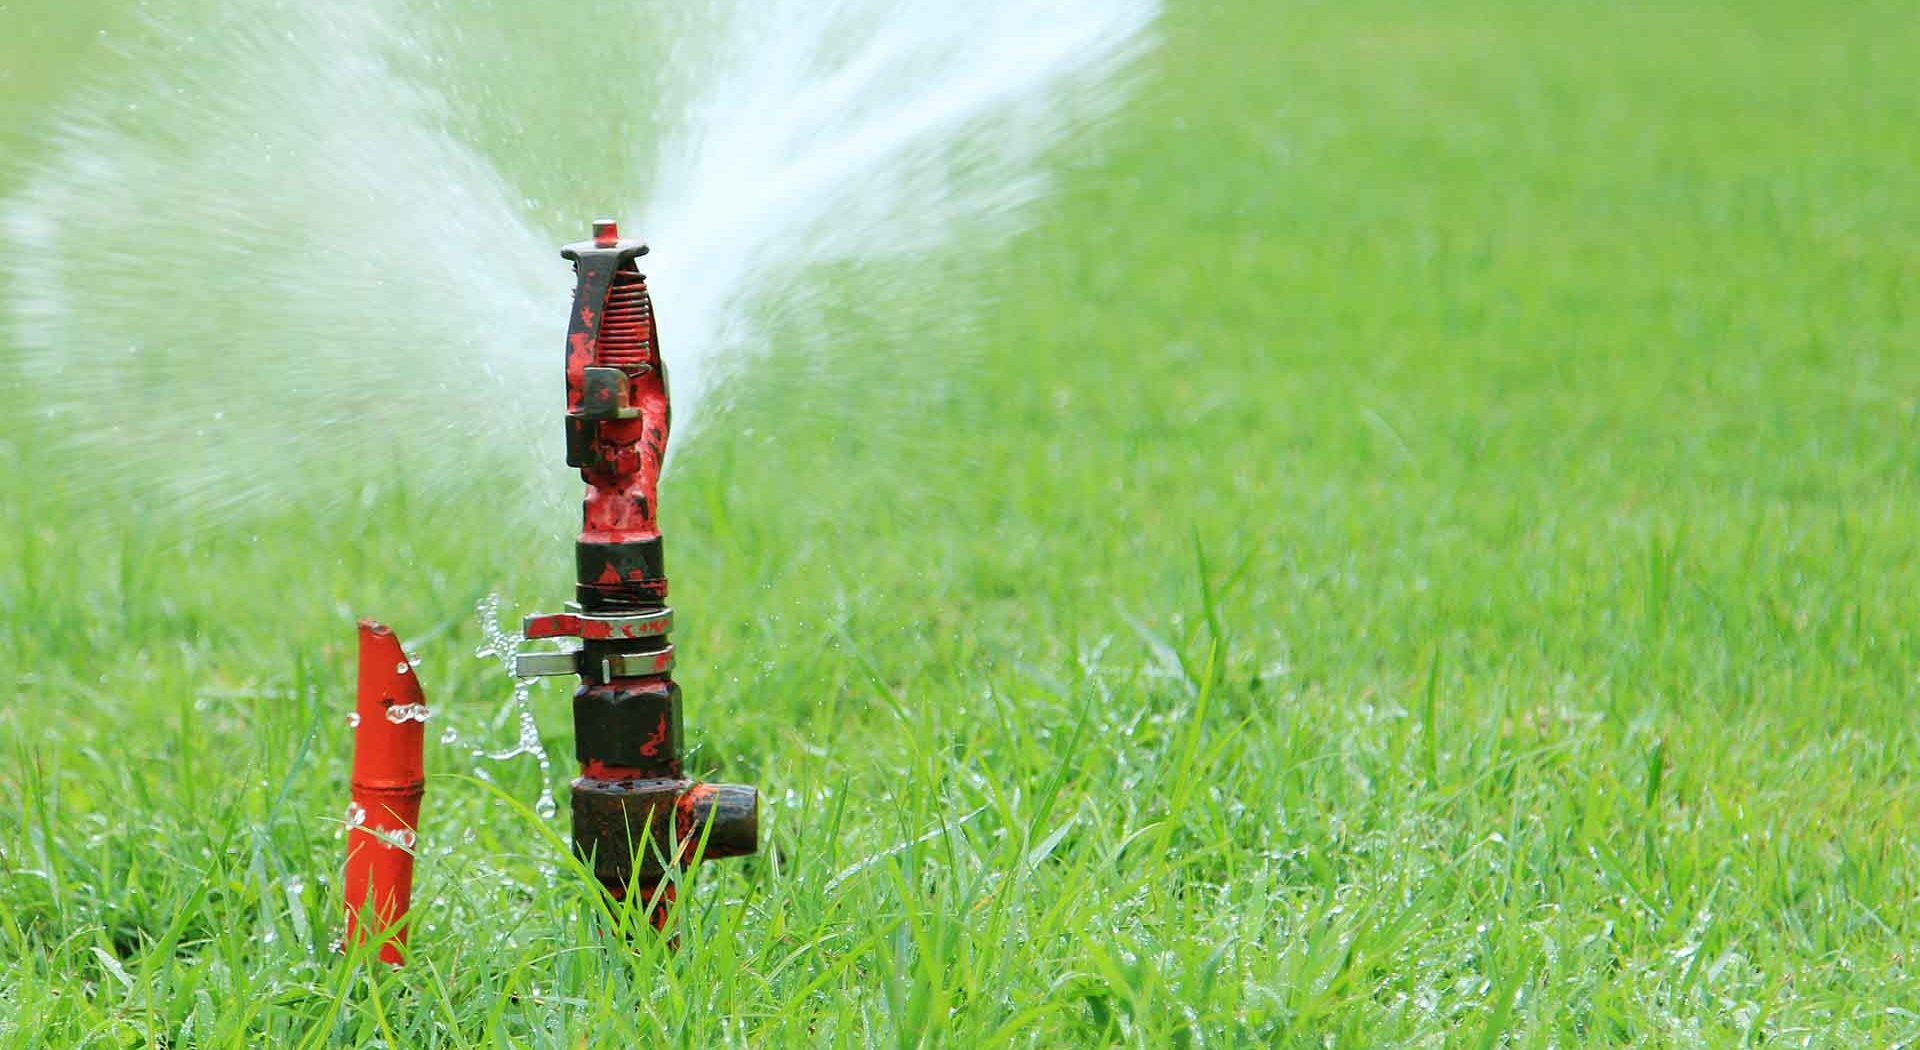 How Do I Maintain My Lawn Sprinkler System?